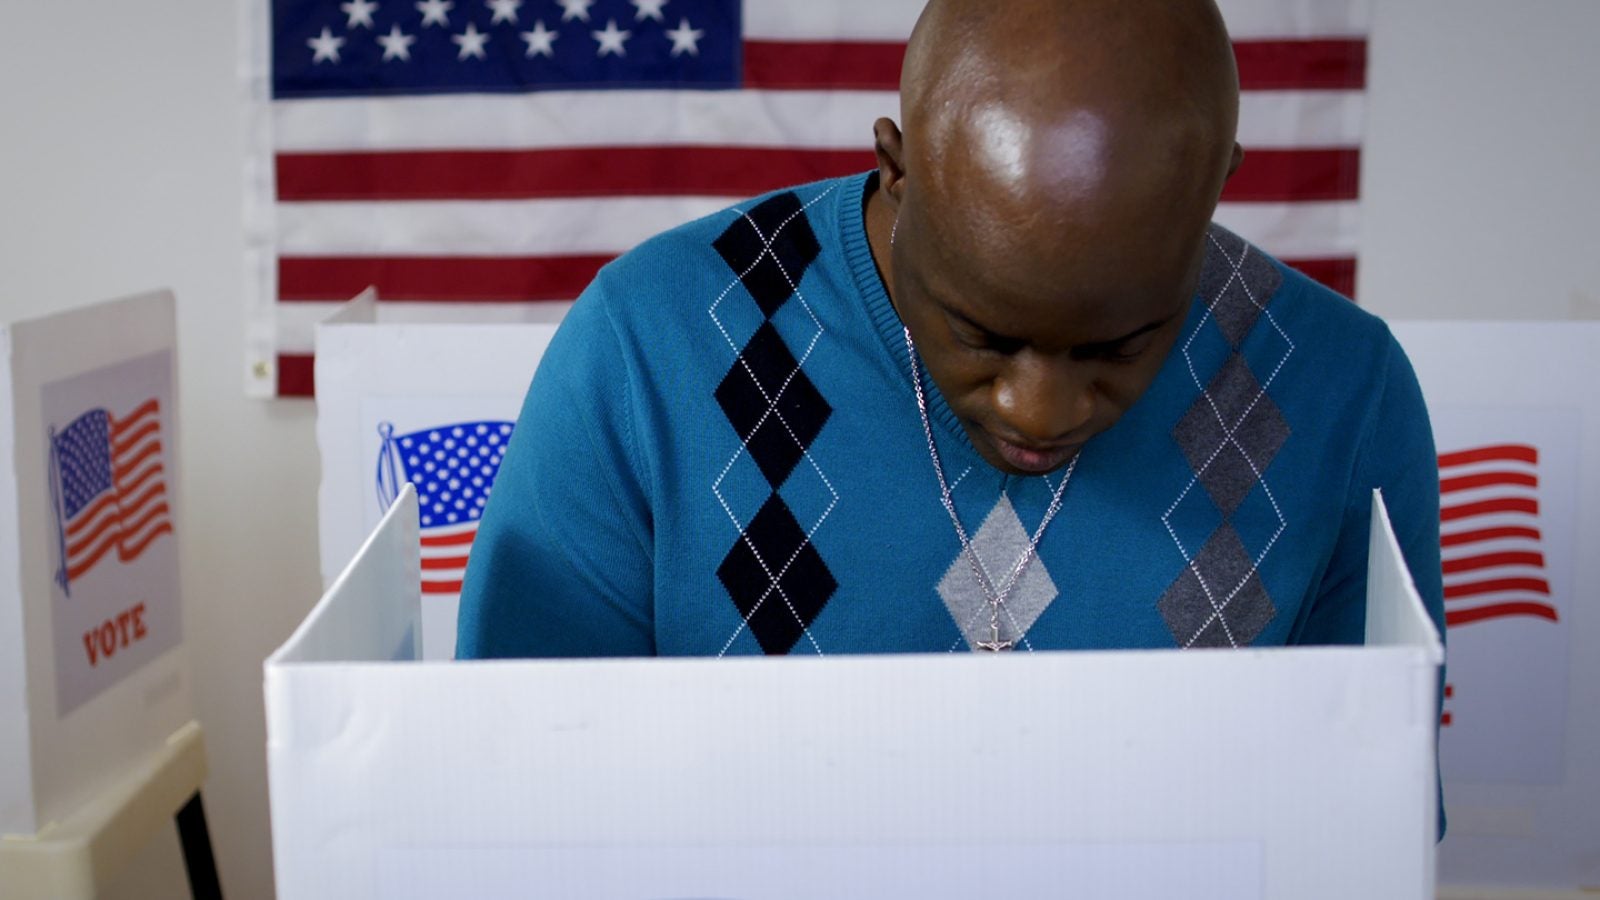 MS front view African American man in blue sweater and wearing a silver cross on a chain casting vote in booth at polling station. US flag on wall in background